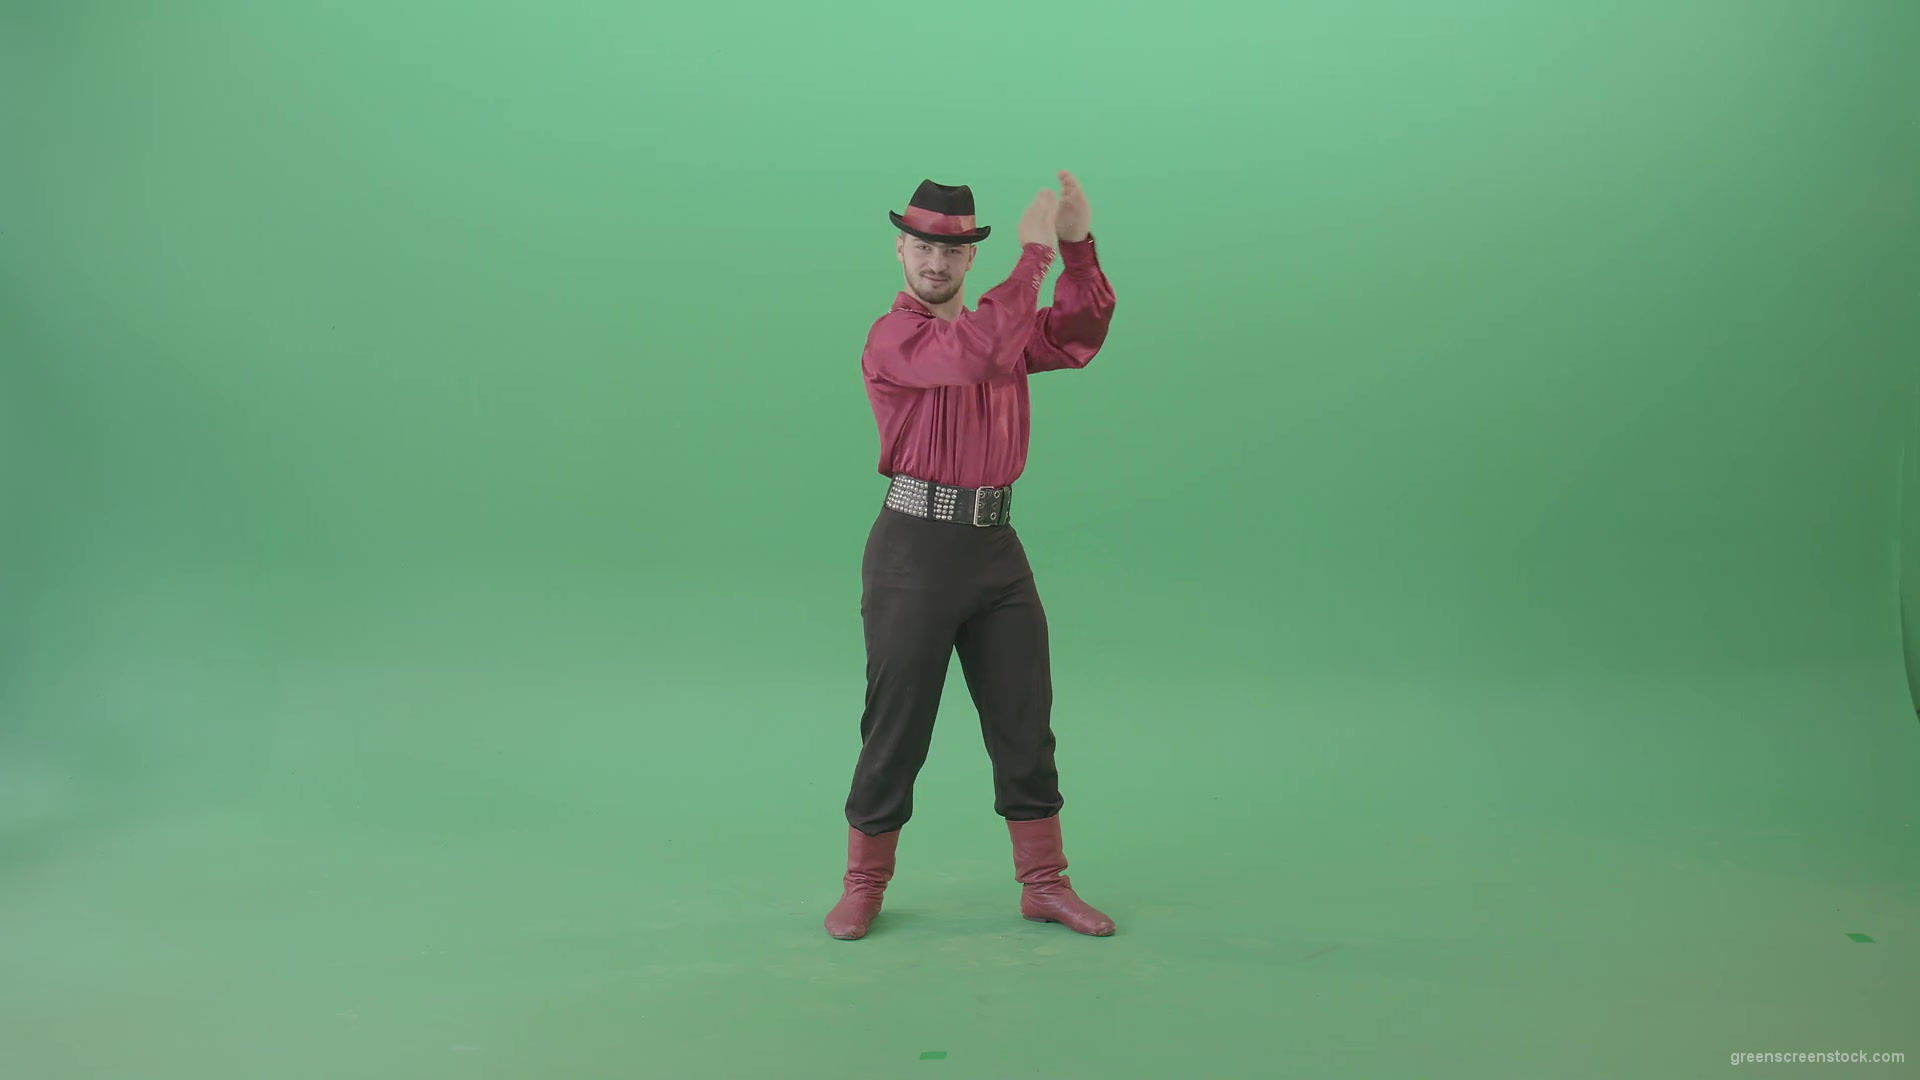 Modovian-Balkan-Gipsy-man-clapping-hands-isolalated-on-green-screen-4K-Video-Footage-1920_009 Green Screen Stock